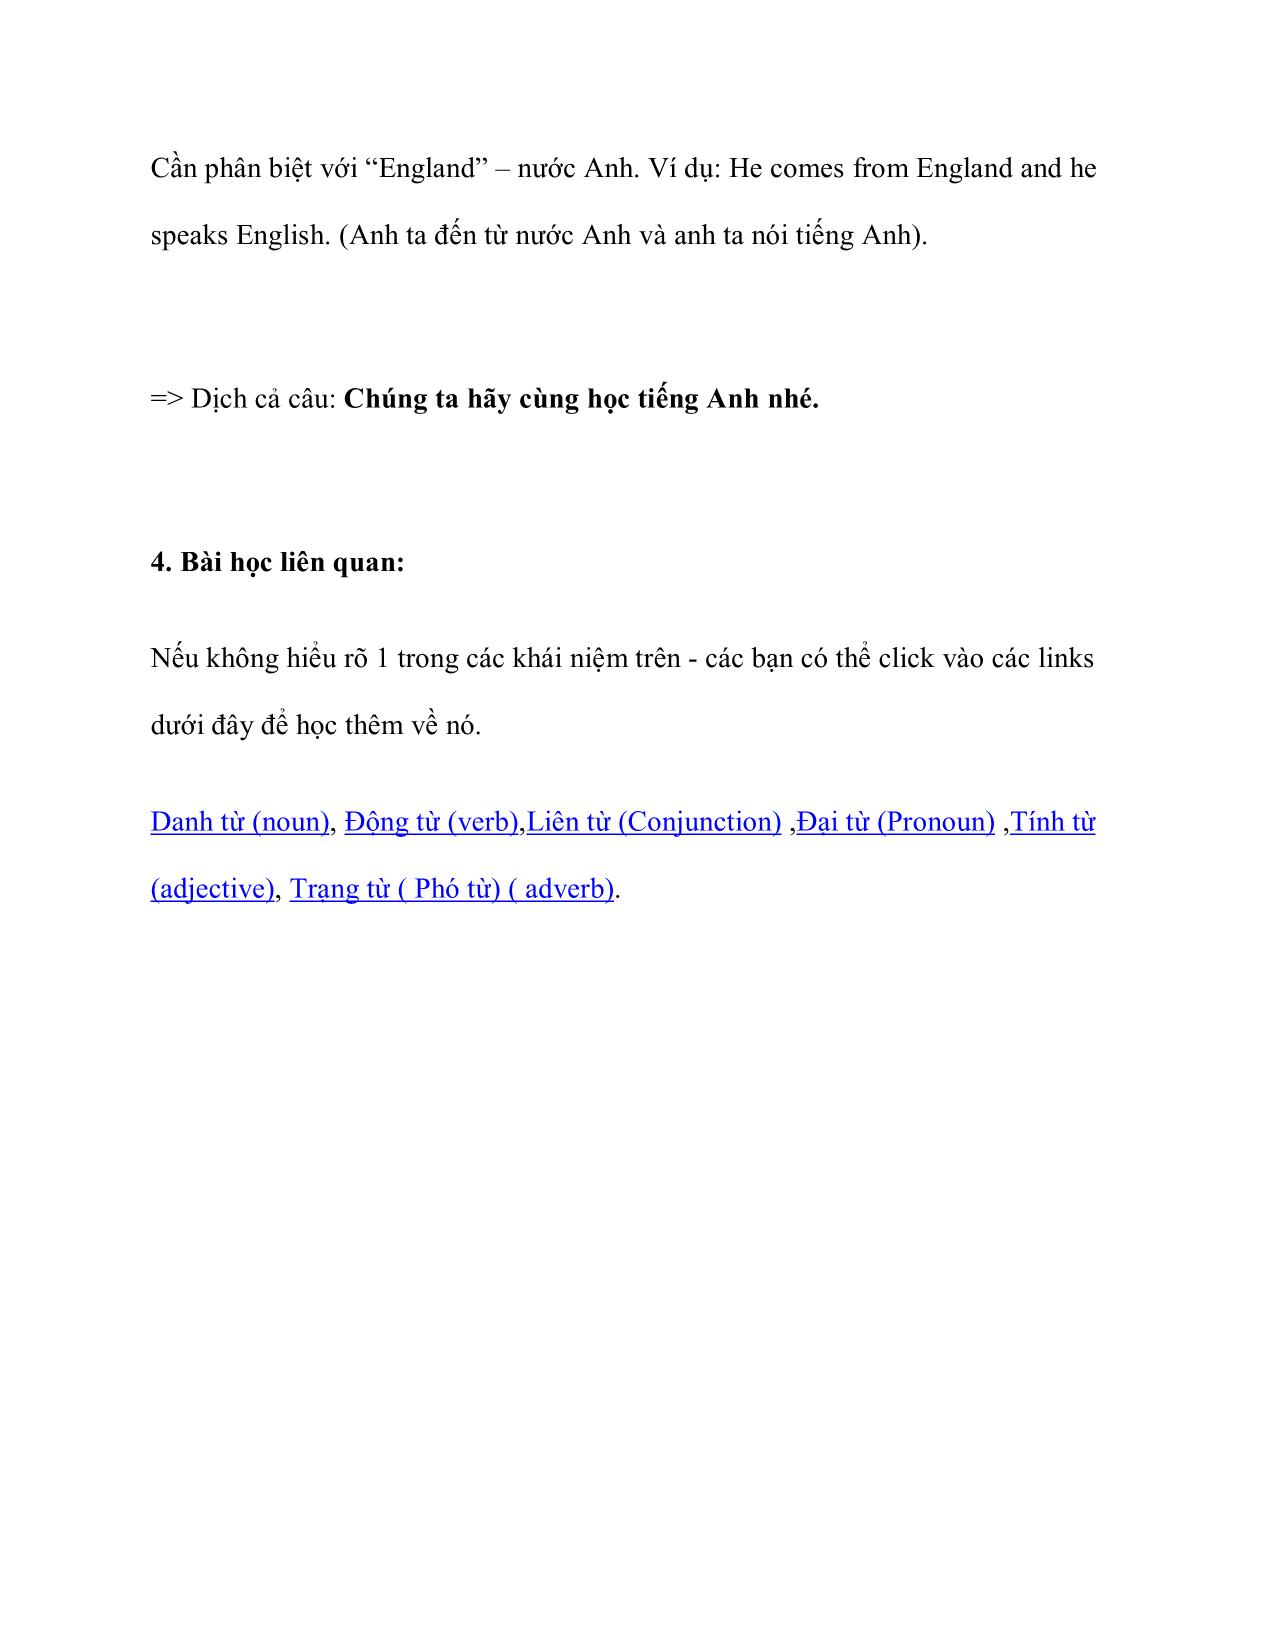 Let’s learn English trang 5